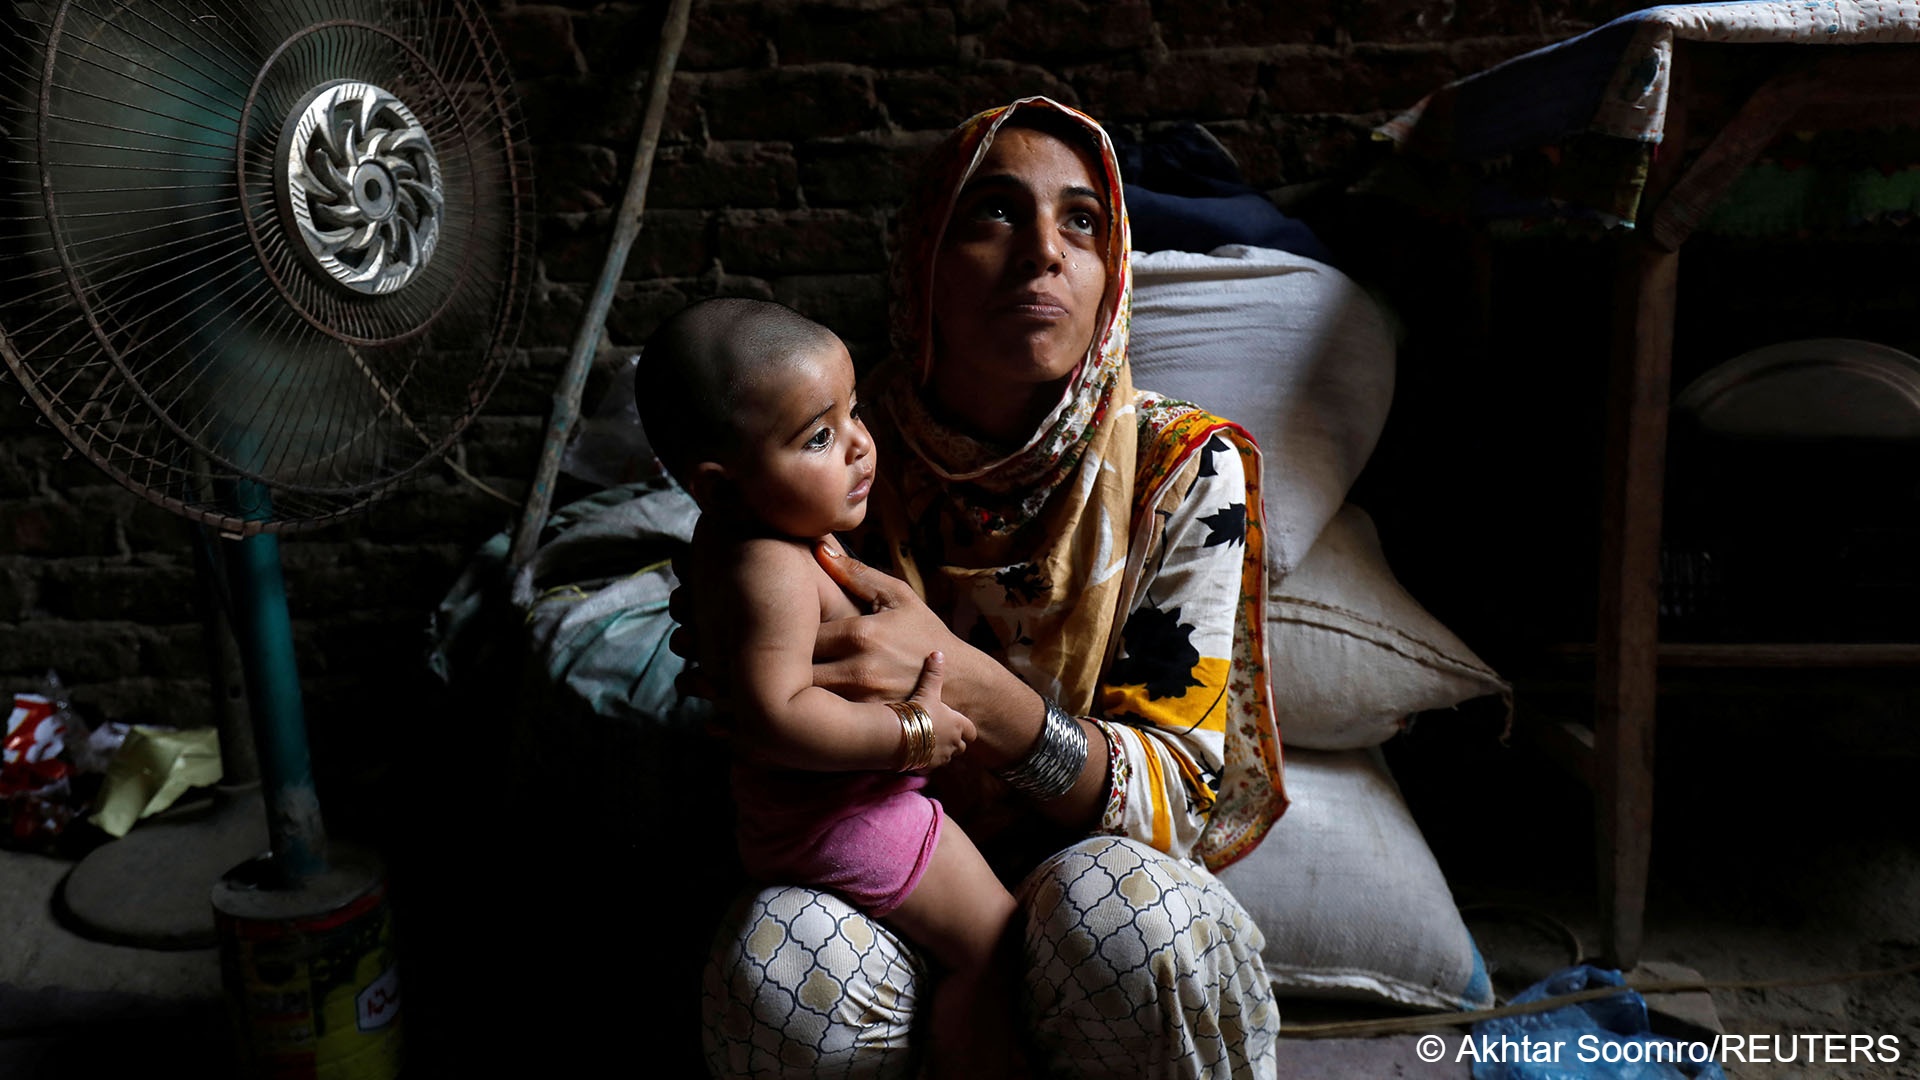 Young mother Razia attempts to cool her six-month-old baby down (photo: Reuters/Akhtar Soomro)